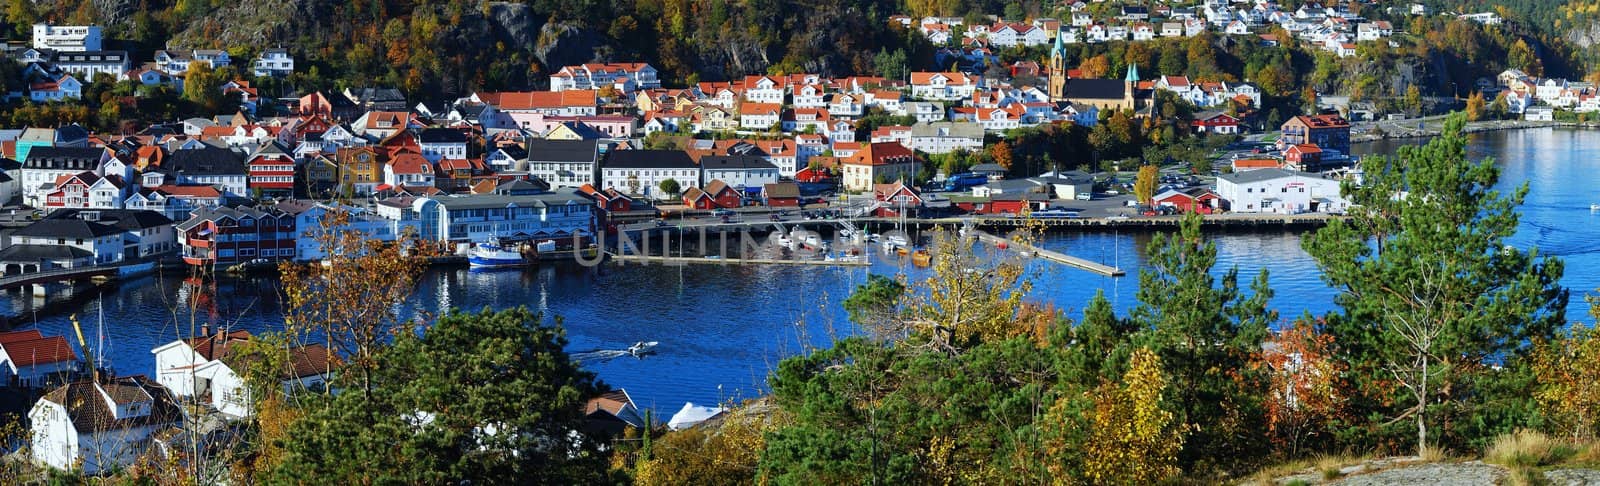 Autumn view of the city center and marina by teus